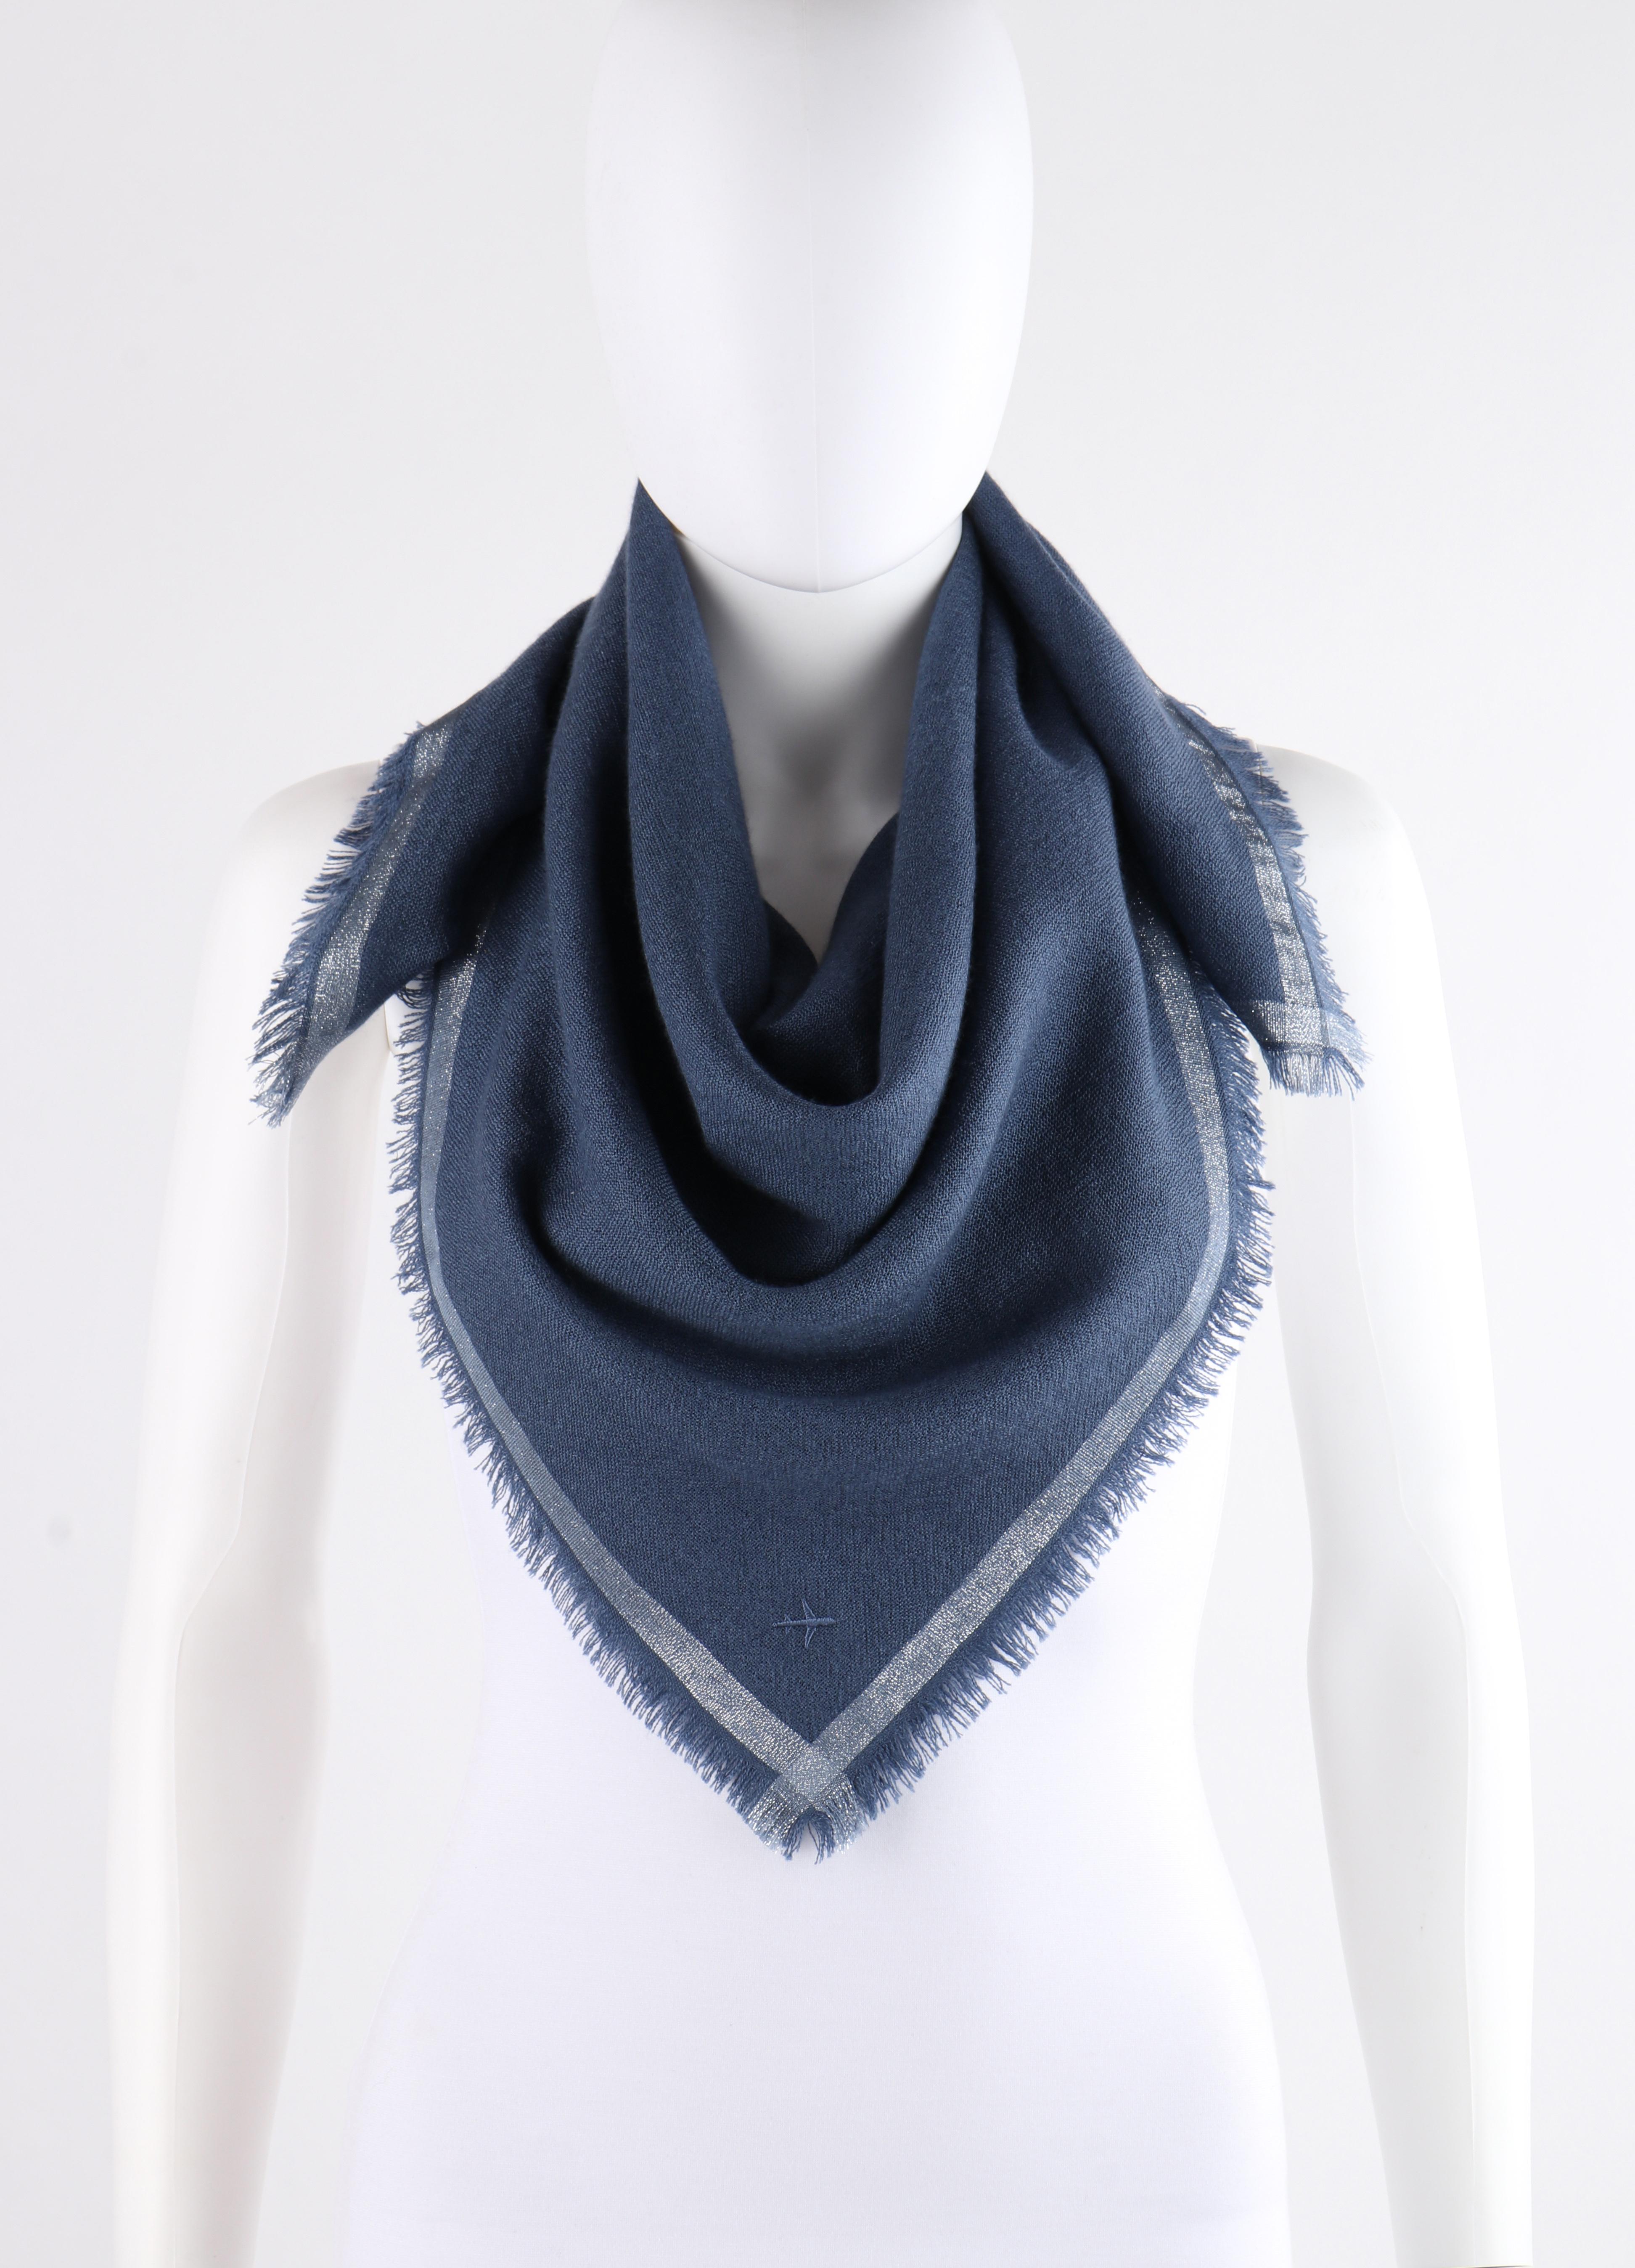 LORO PIANA “Quadrata Carre” Blue Silver Silk Cashmere Fringe Knit Travel Scarf
 
Estimated Retail: $ 900.00
 
Brand/Manufacturer: Loro Piana 
Style: Large square scarf
Color(s): Shades of blue and silver
Lined: No
Marked Fabric Content: “70%